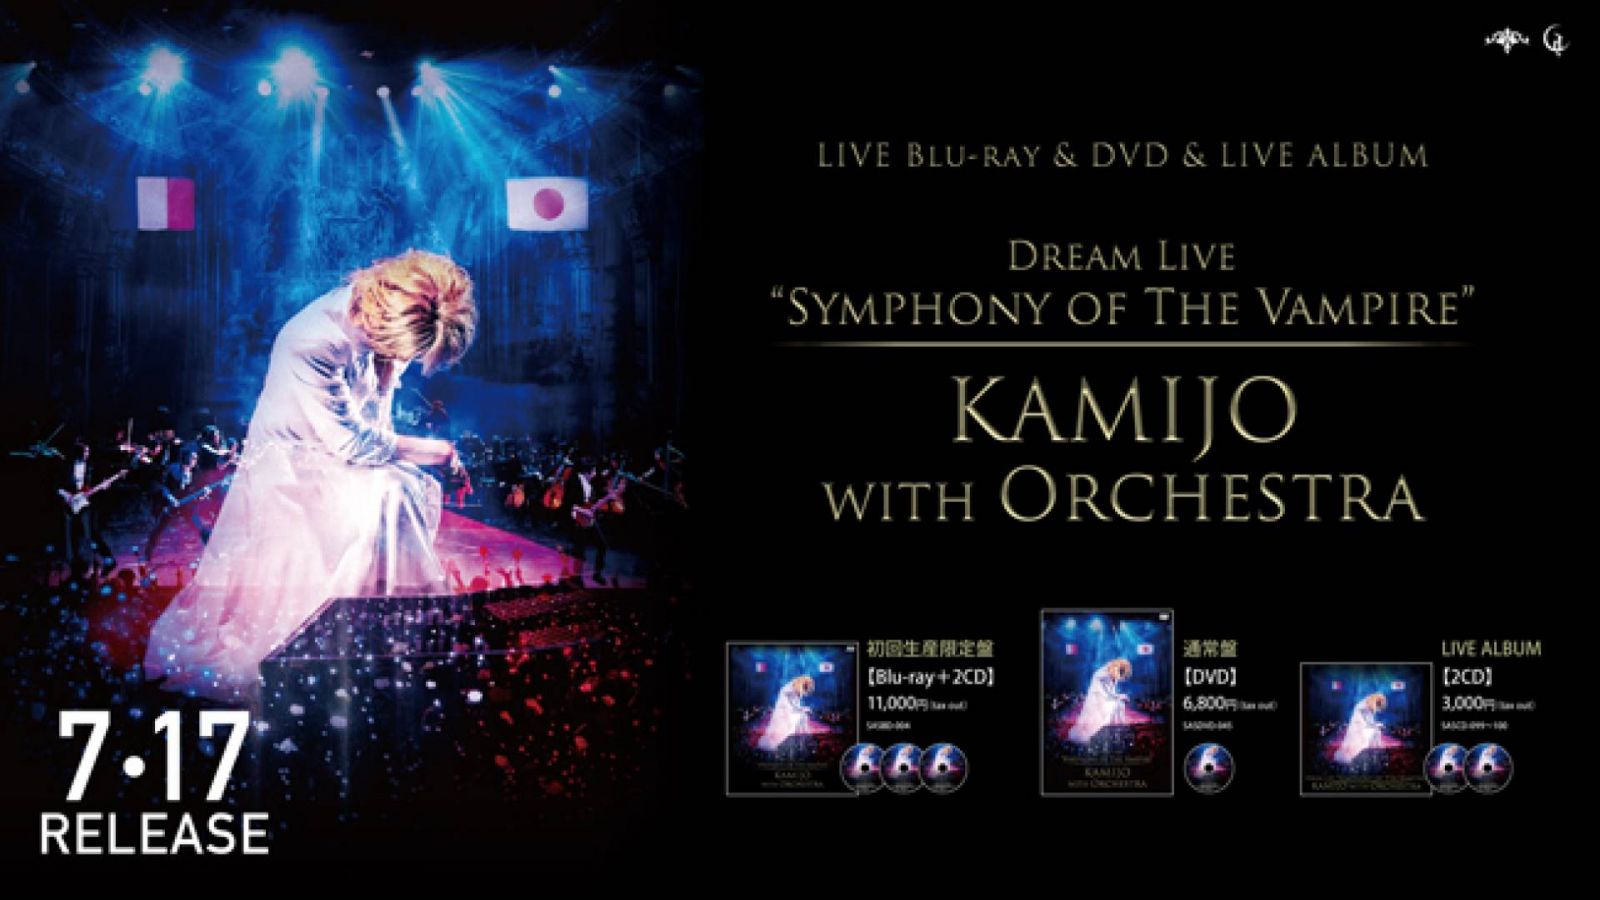 New Live Release from KAMIJO © CHATEAU AGENCY CO., Ltd. All rights reserved.